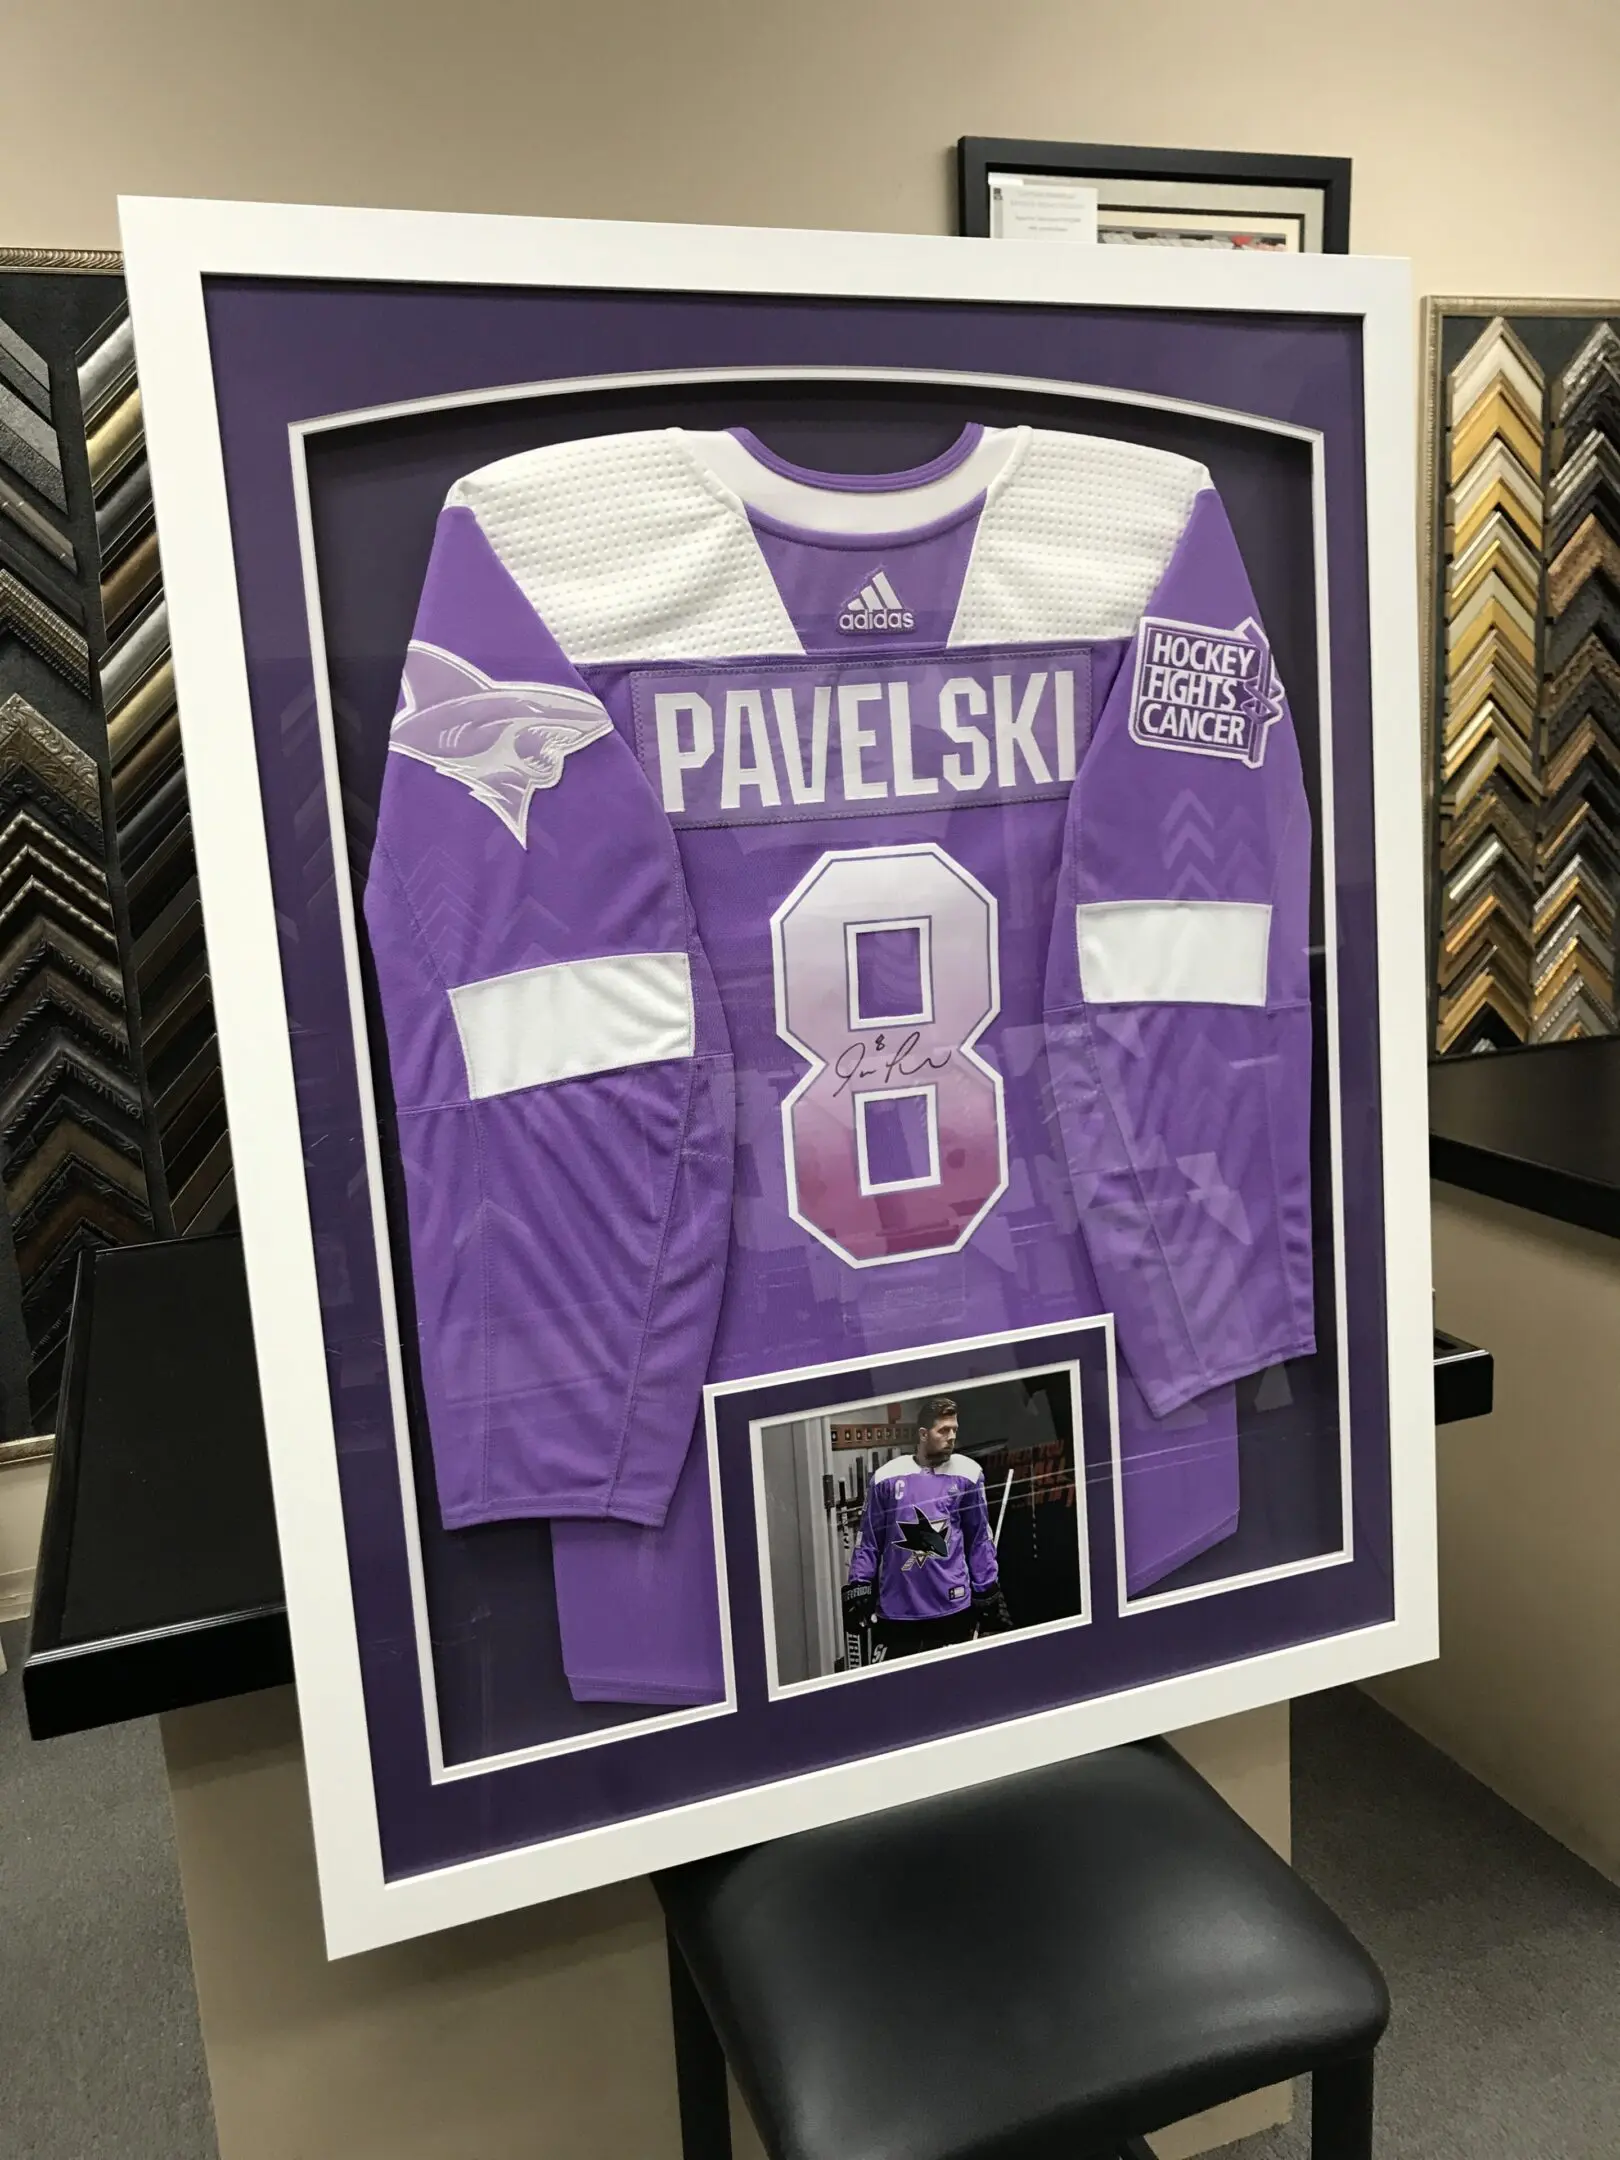 A framed jersey is displayed in the middle of a table.